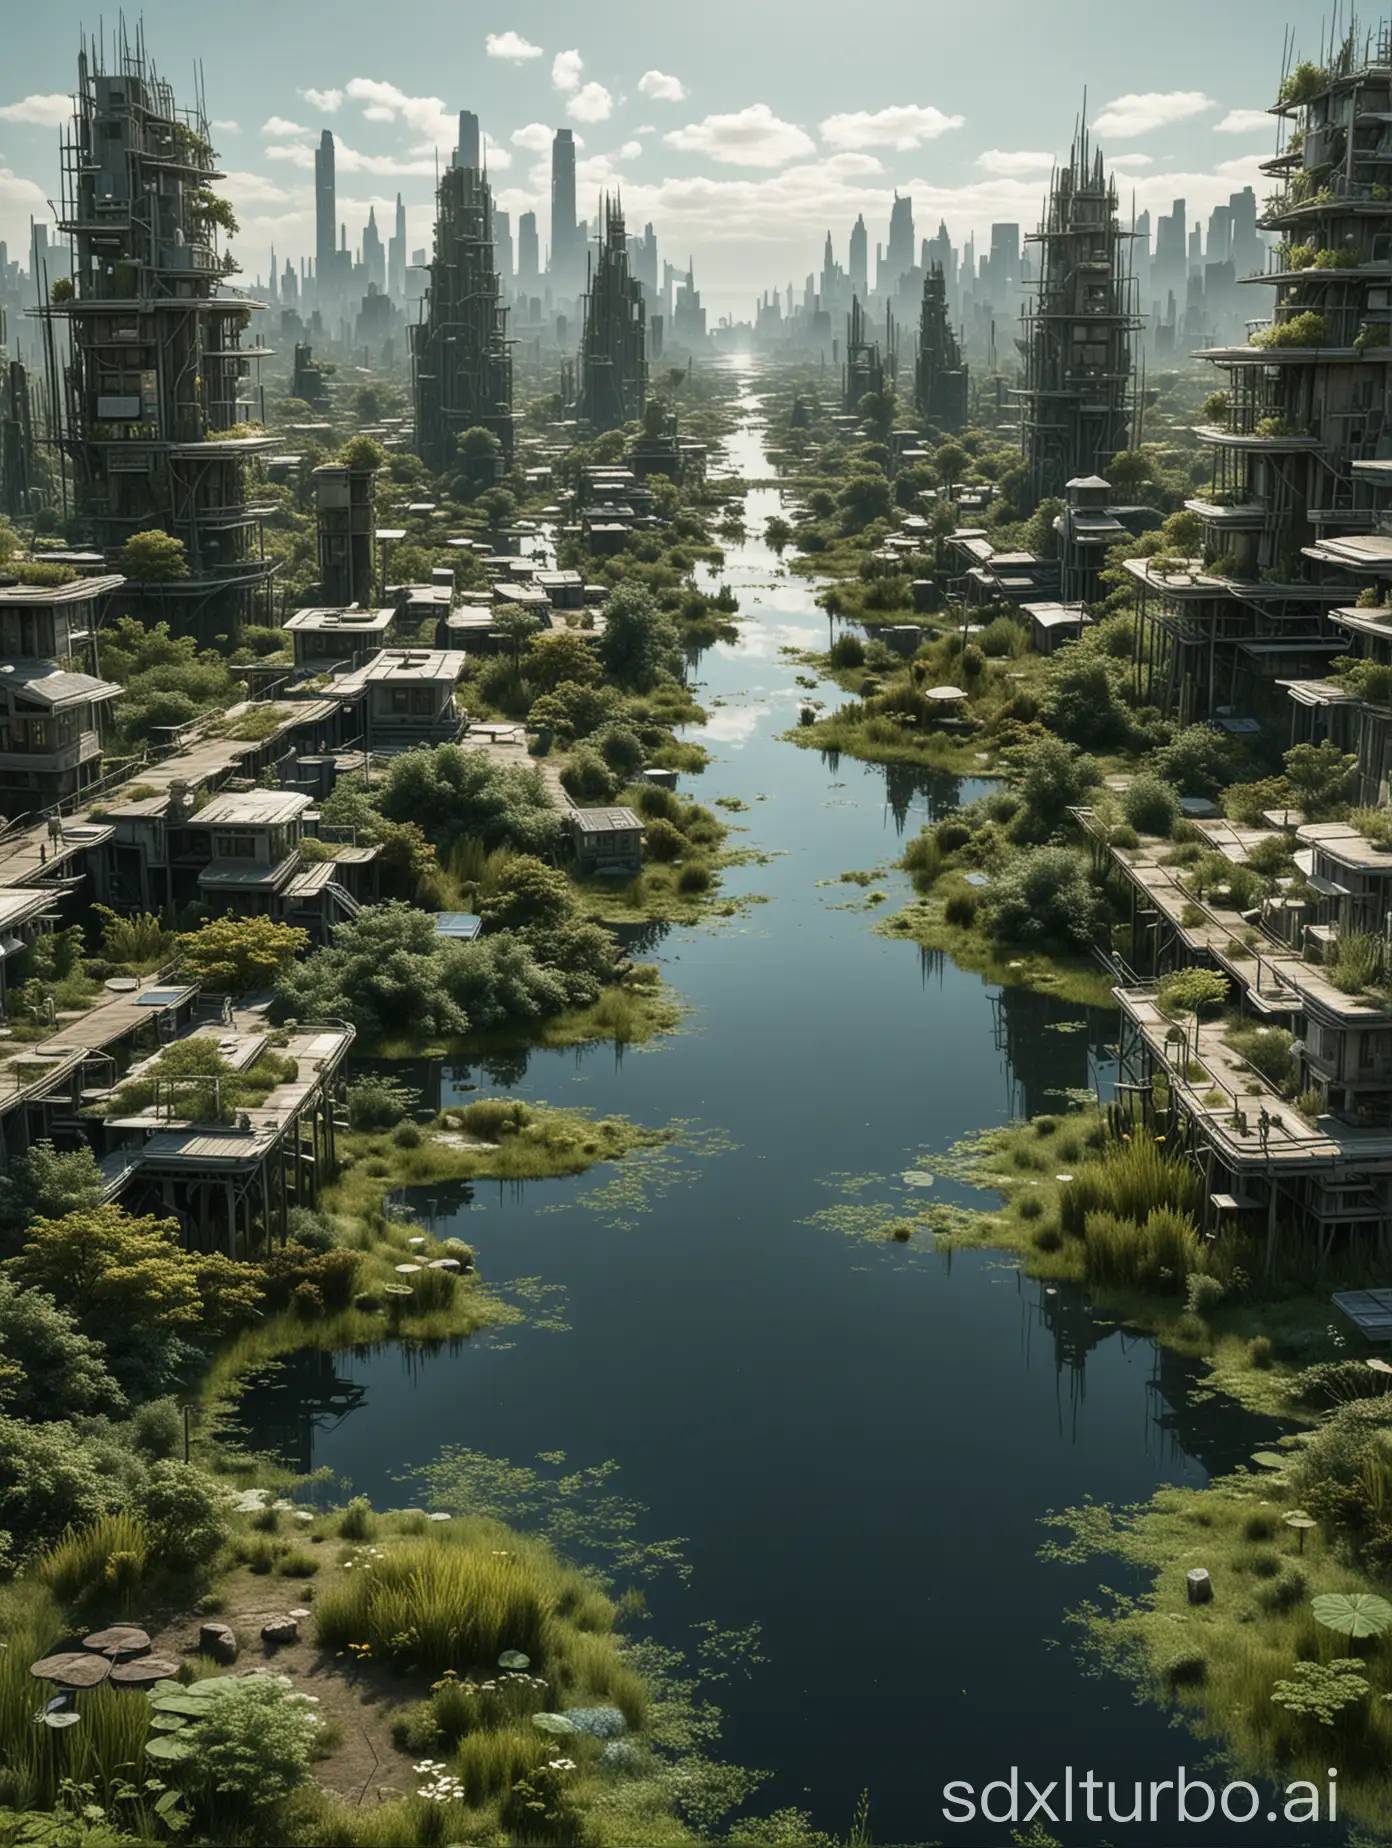 DonMCyb3rSp4c3XL Displacement Mapping architecture Utopian City Wetland Ecosystem, cyberspace,sci-fi, tech,<lora:DonMCyb3rSp4c3XL-000010:0.85>